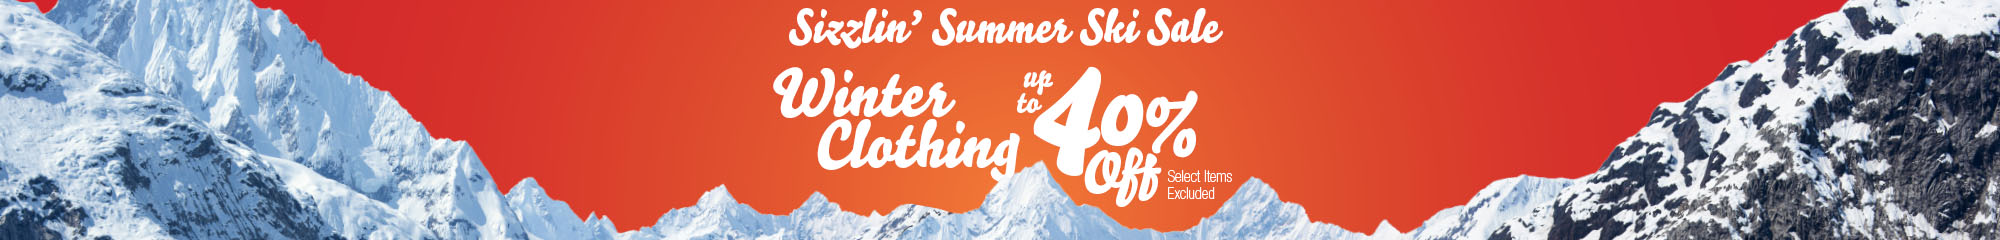 Sizzling Summer Ski Sale. Up to 40% Off. 